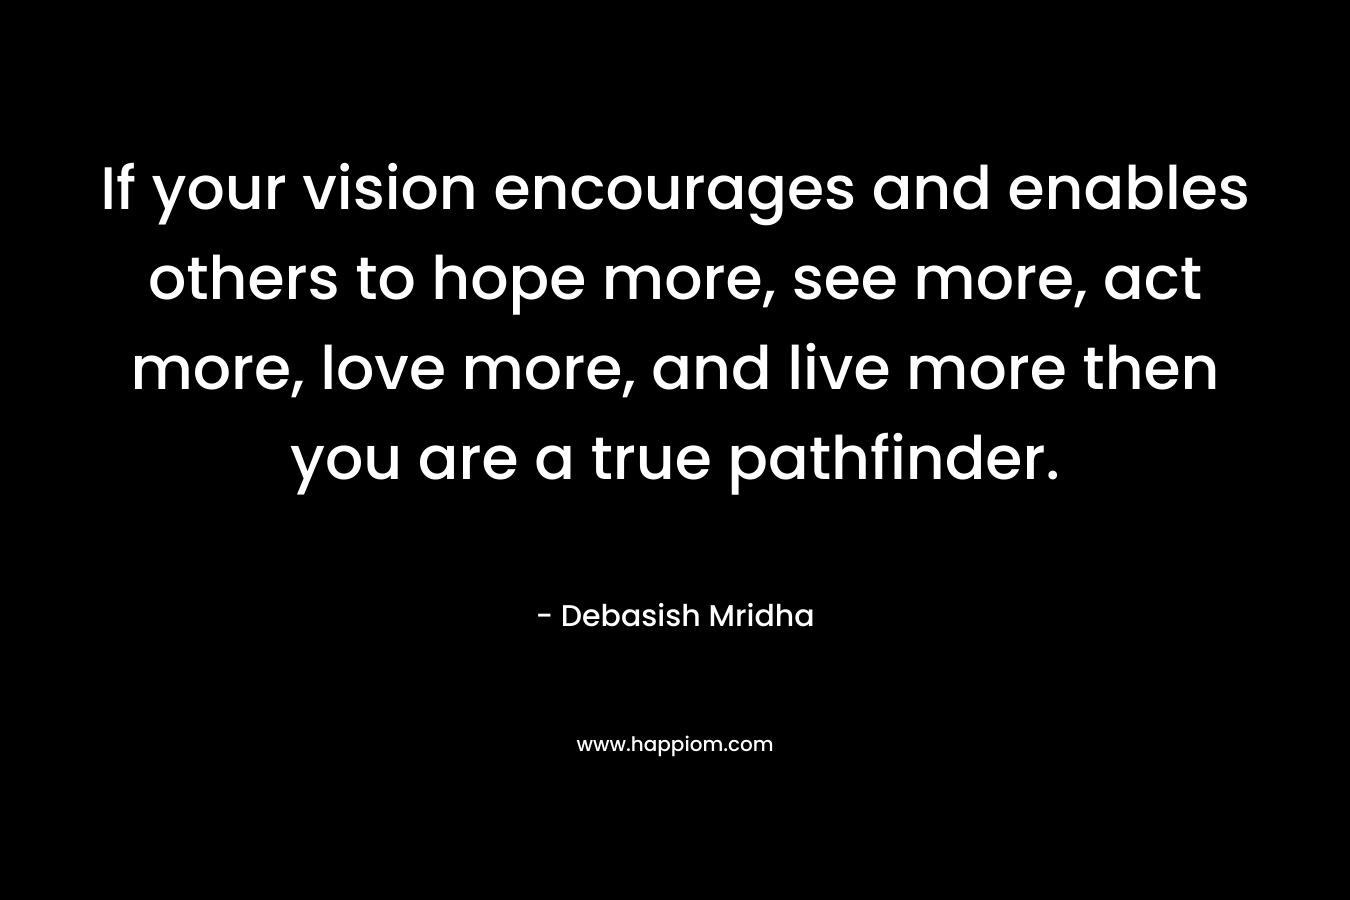 If your vision encourages and enables others to hope more, see more, act more, love more, and live more then you are a true pathfinder. – Debasish Mridha